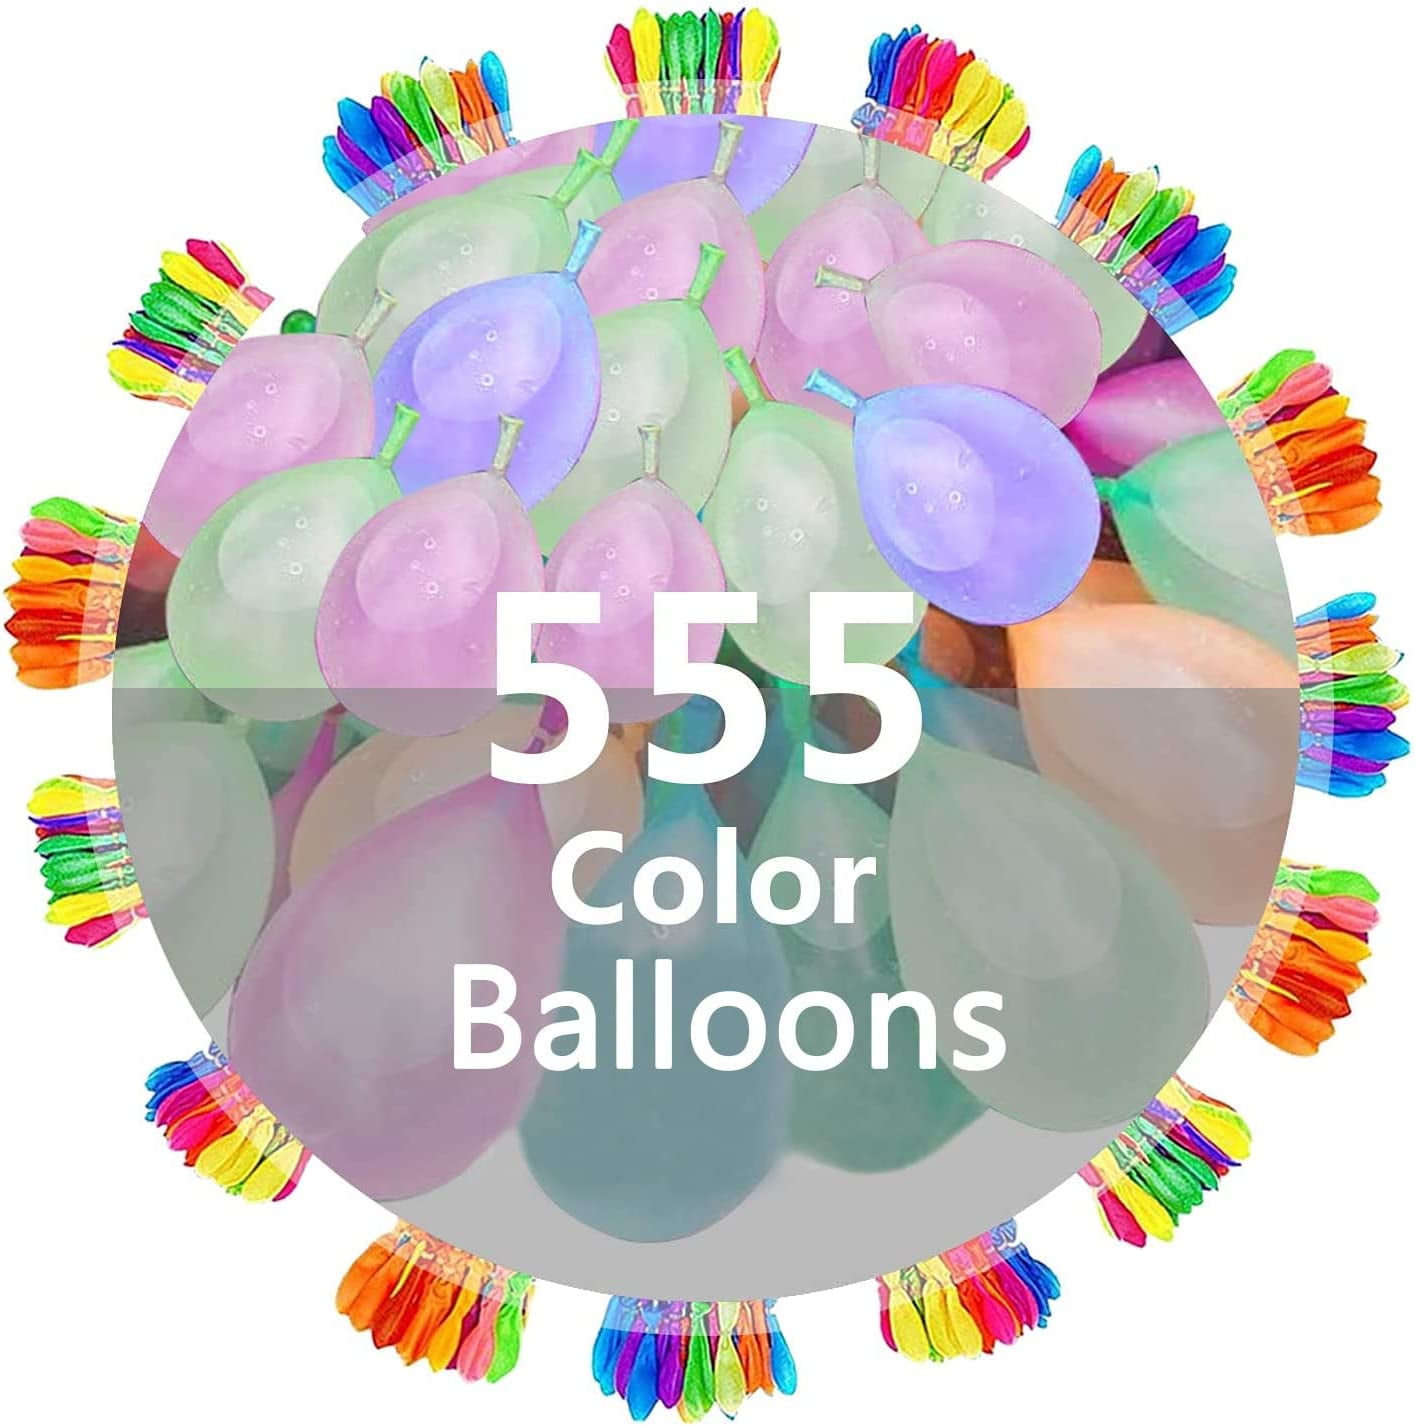 18 Bunch Water Balloons for Kids Girls Boys Balloons Set Quick Fill 666 Balloons 18 Bunches for Party Games Swimming Pool Outdoor Summer Fun -26 